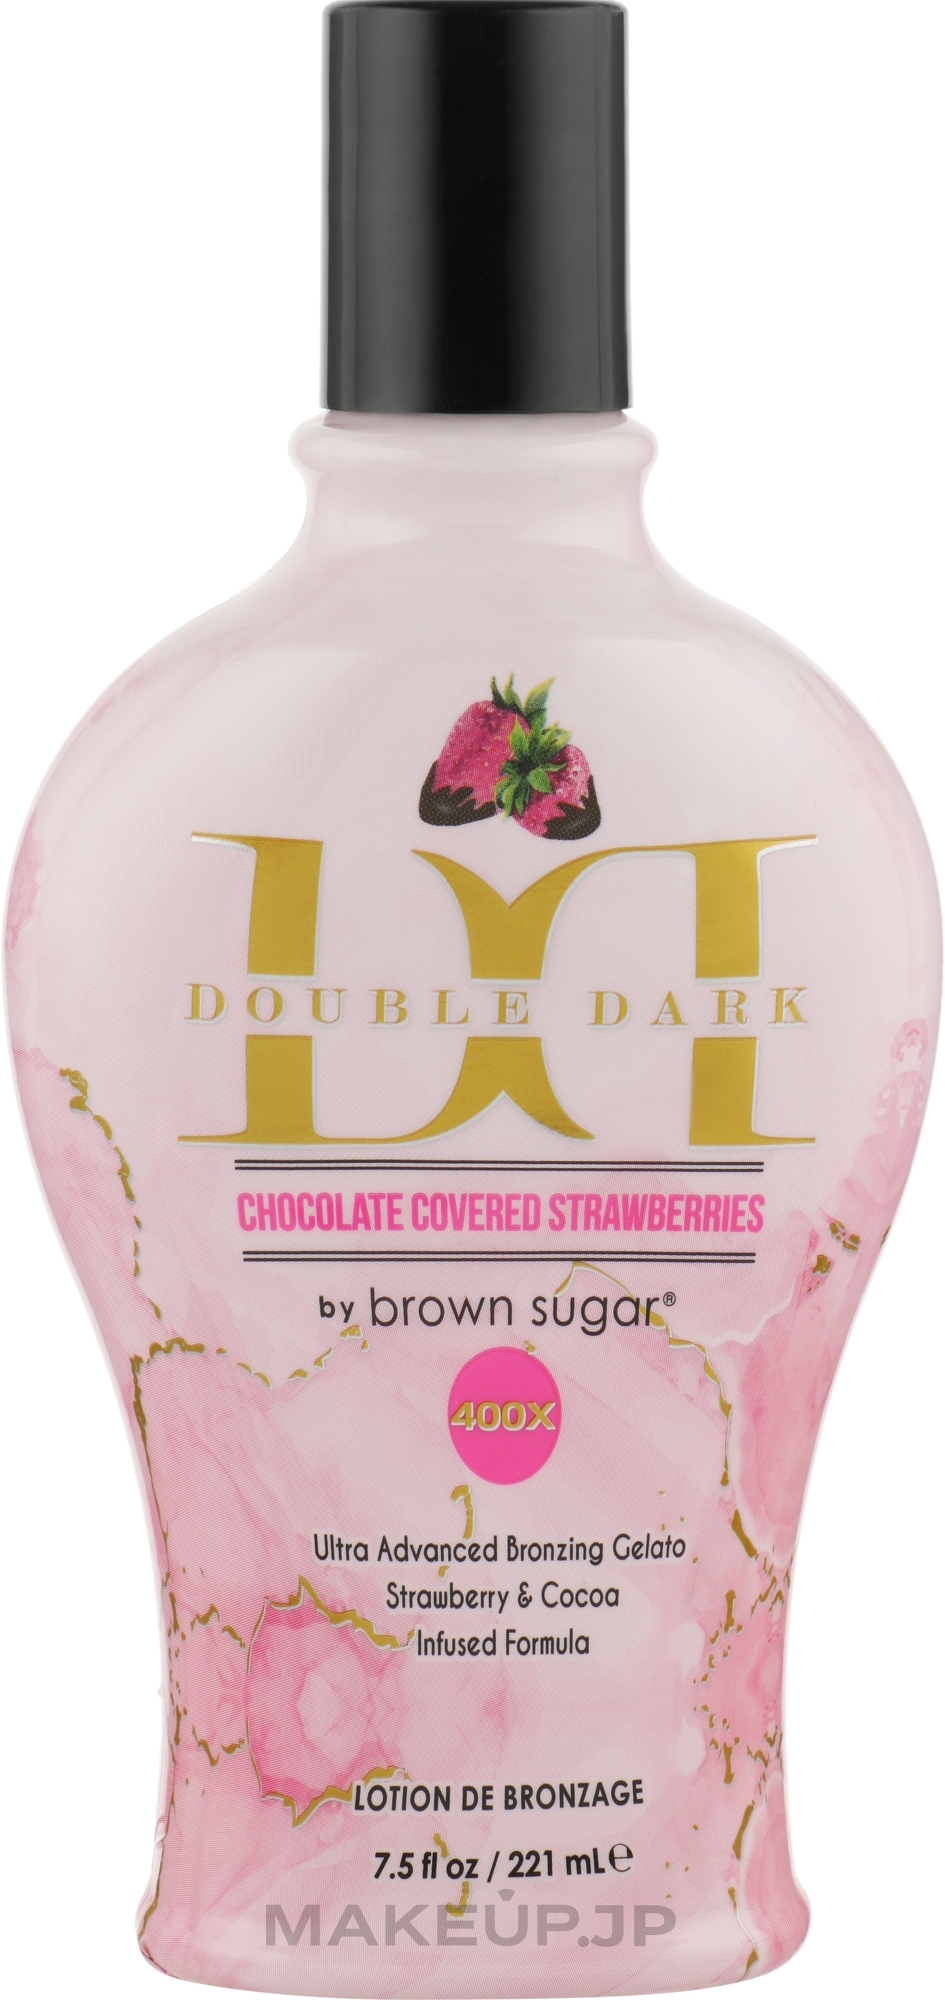 Ultra Advanced Bronzing Cream with Strawberry Extract - Tan Incorporated Chocolate Covered Strawberries 400X Double Dark Black — photo 221 ml